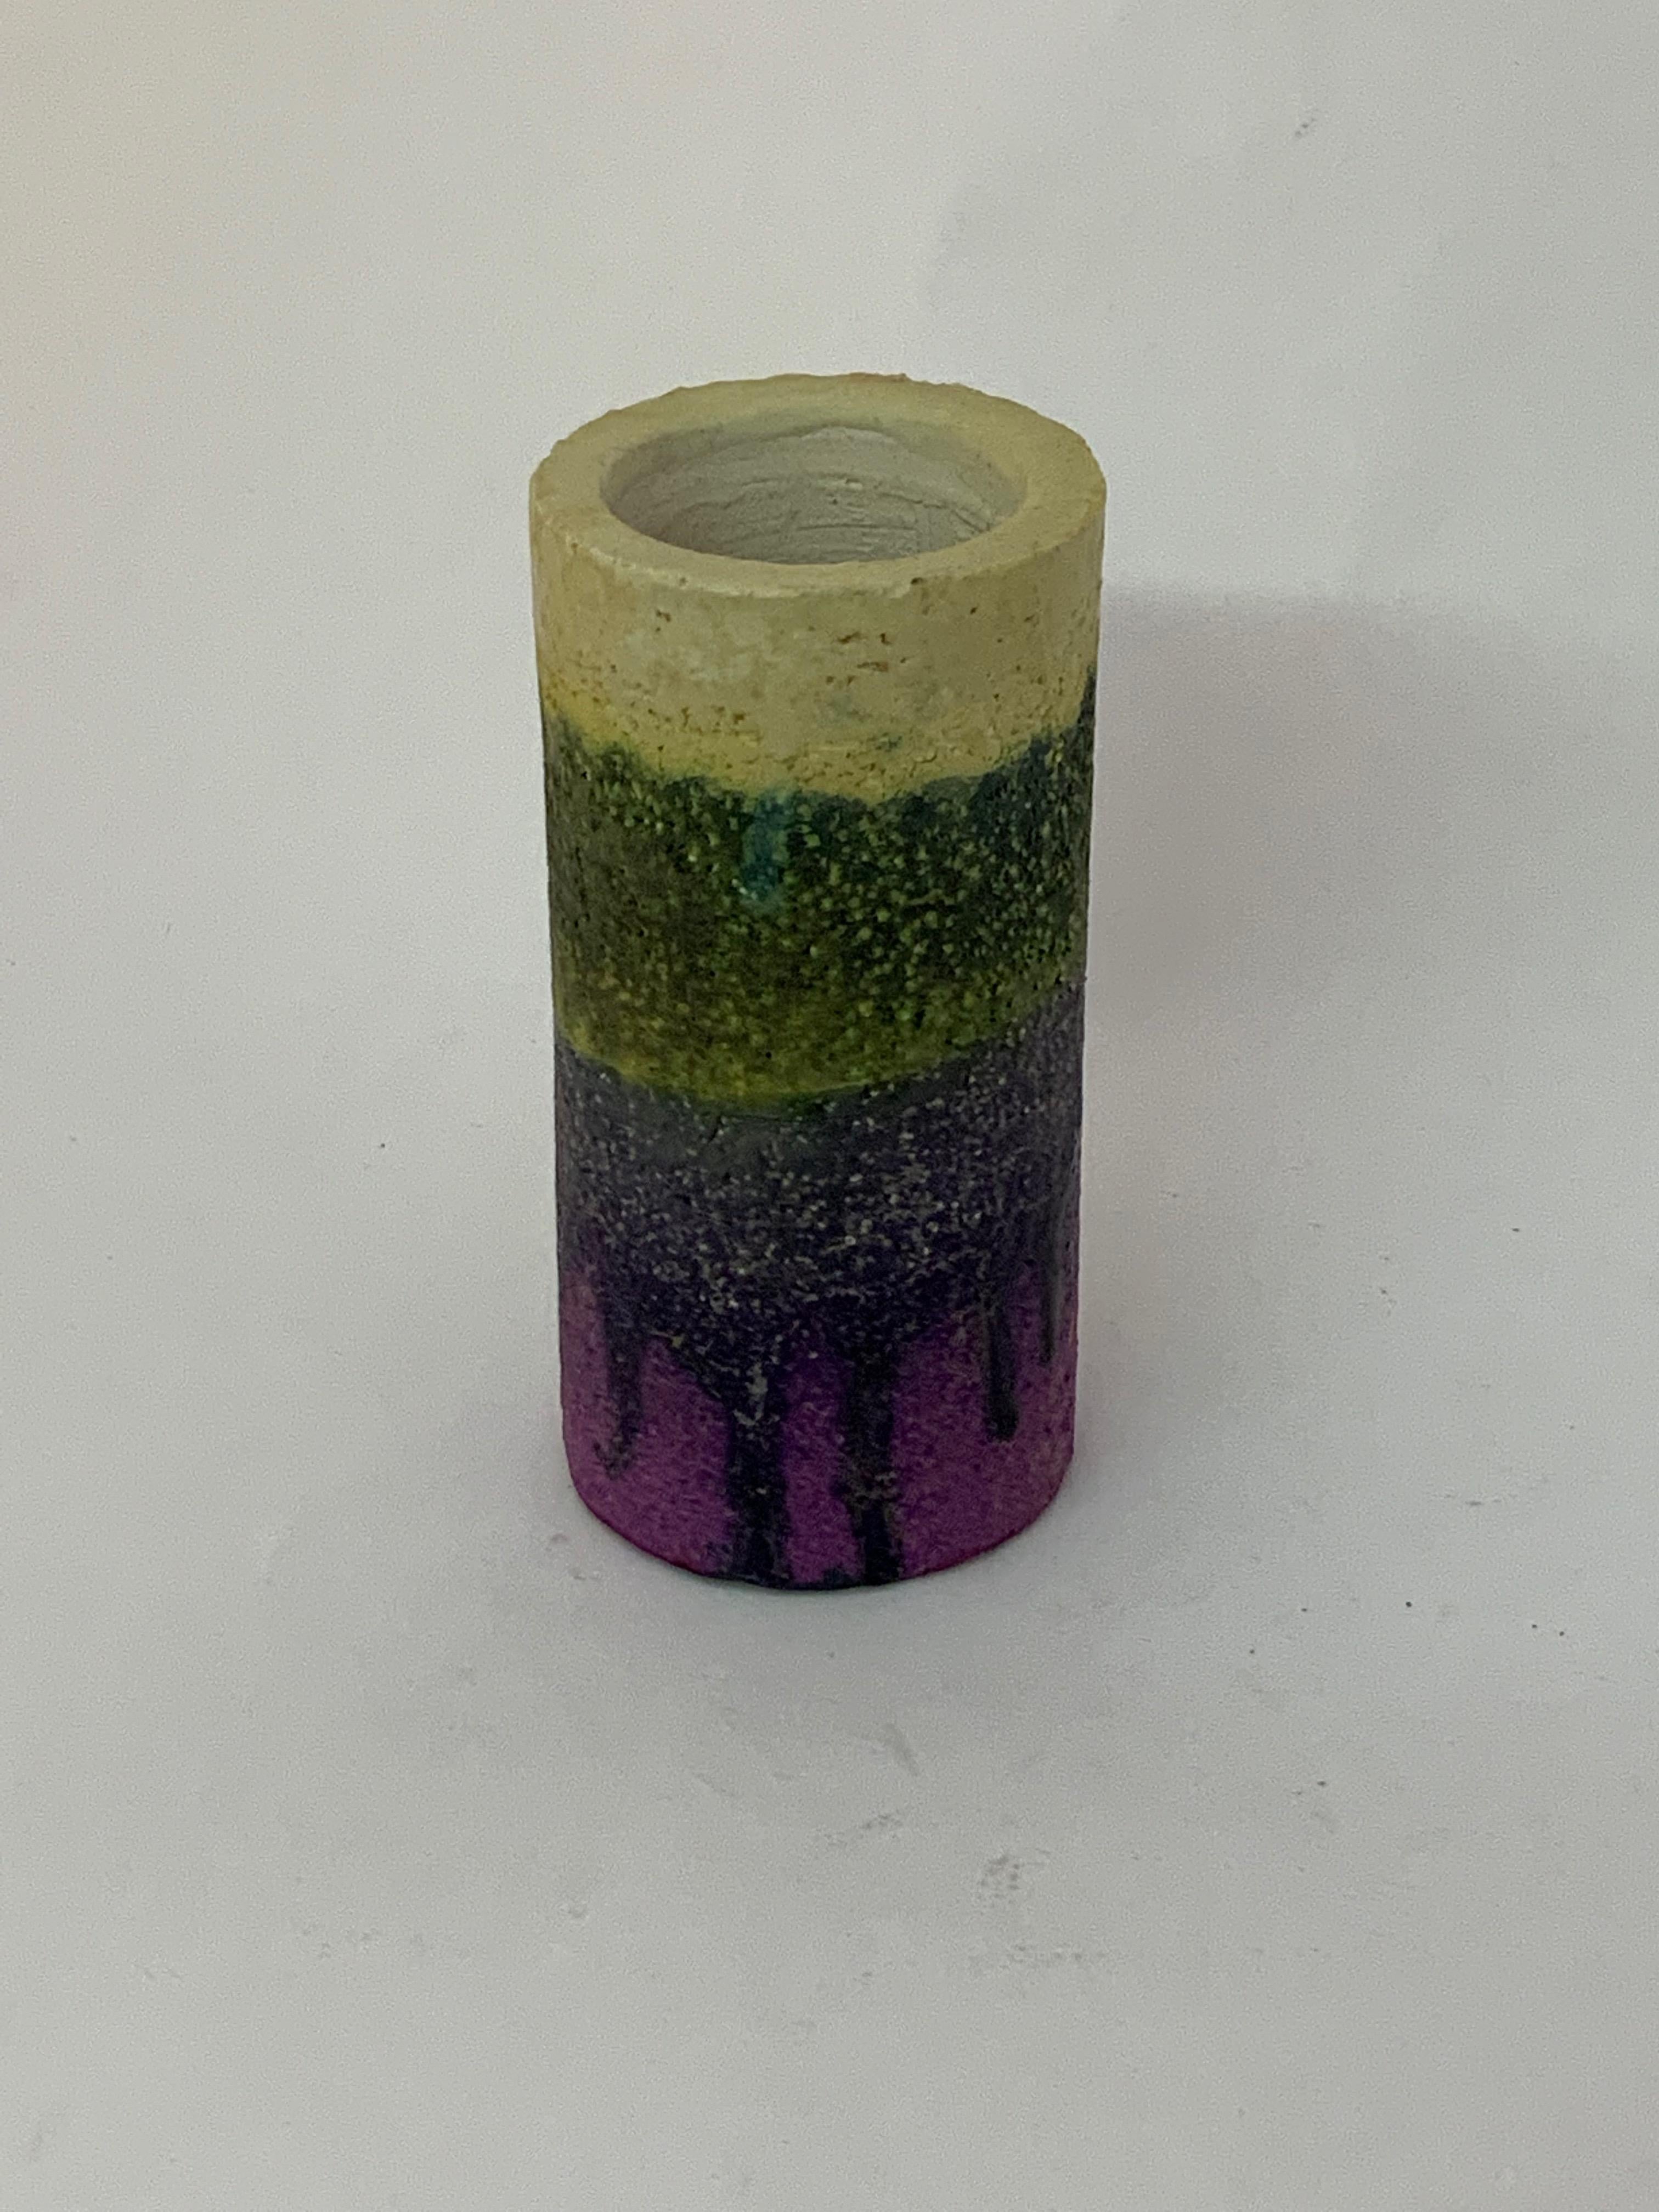 Outstanding drip glaze pottery vase by Marcello Fantoni for Raymor. Fully signed cylindrical vase with original label and signed on the pot. A very good early example of form and color, circa 1950-1960. Very good condition with no visible cracks,